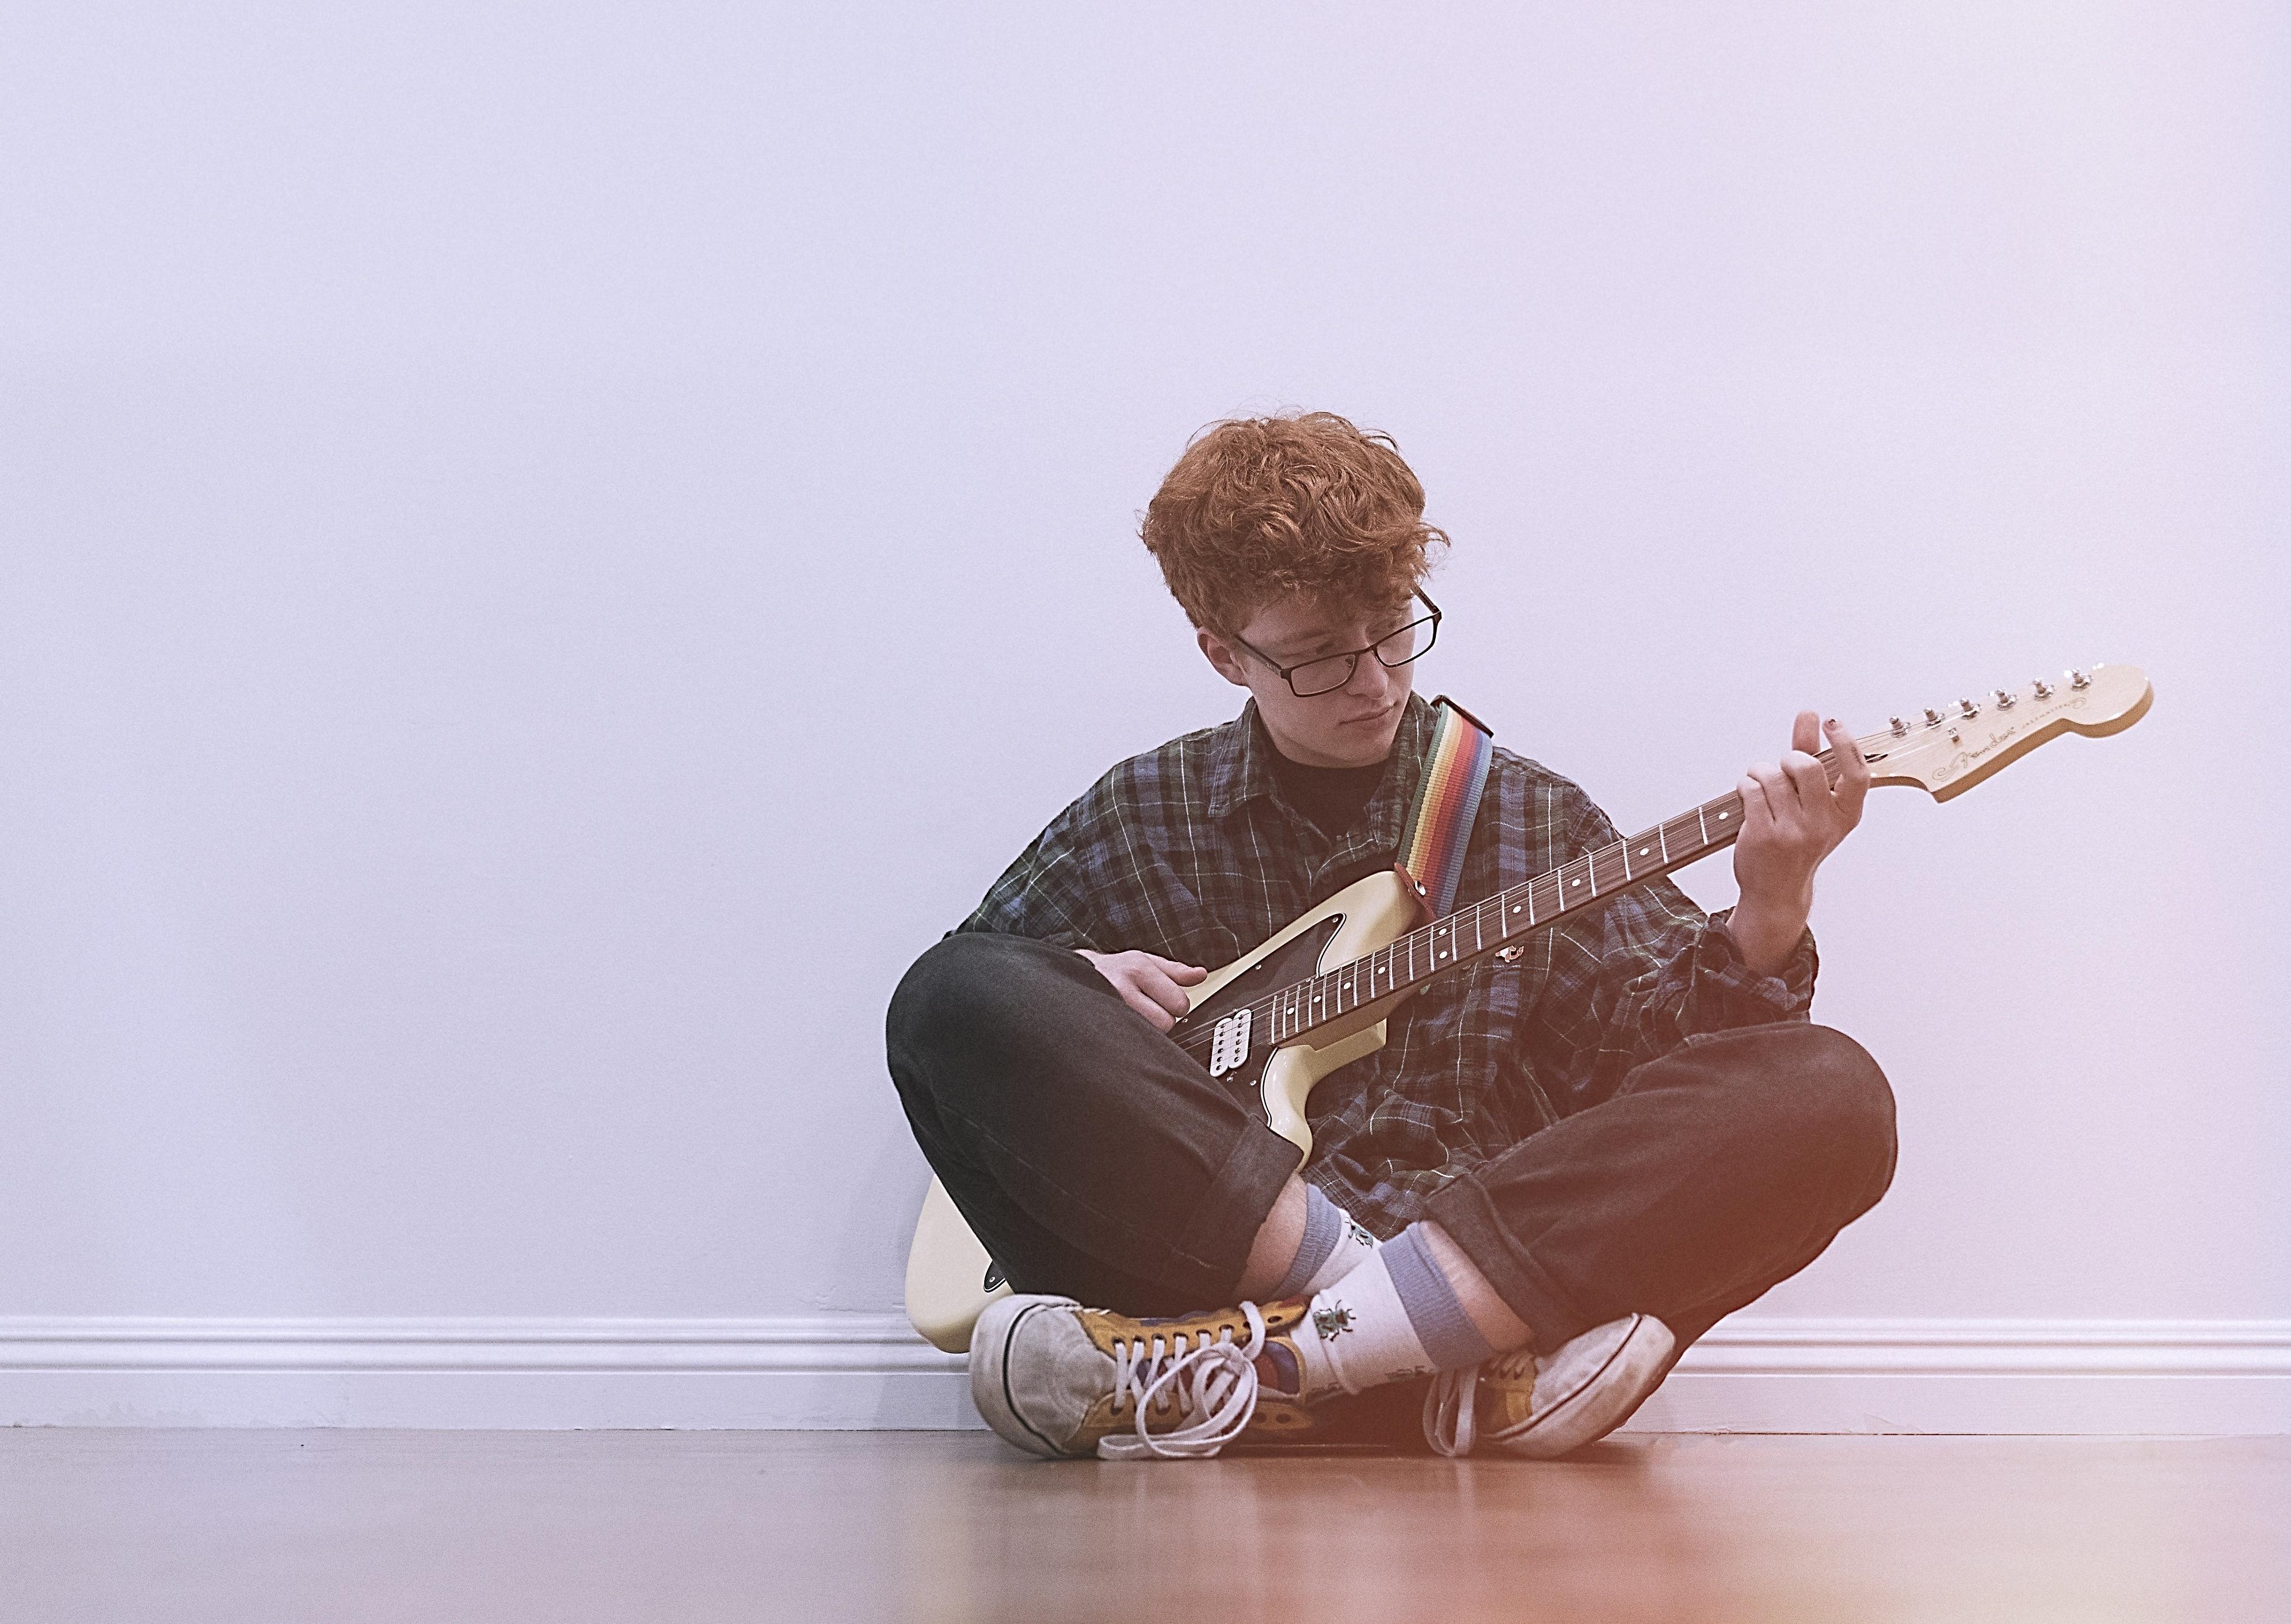 Cavetown, Oh Yeah Centre Belfast, February 23
Hailing from Cambridge and recently signed to Sire Records, the 20-year-old singer/songwriter, producer and multi-instrumentalist Cavetown has cultivated a devoted following of 2 million monthly listeners at Spotify and close to a million subscribers at YouTube – amassing 88 million video views in the process. On the strength of that he is setting out on a UK tour, including a date in Belfast this month.